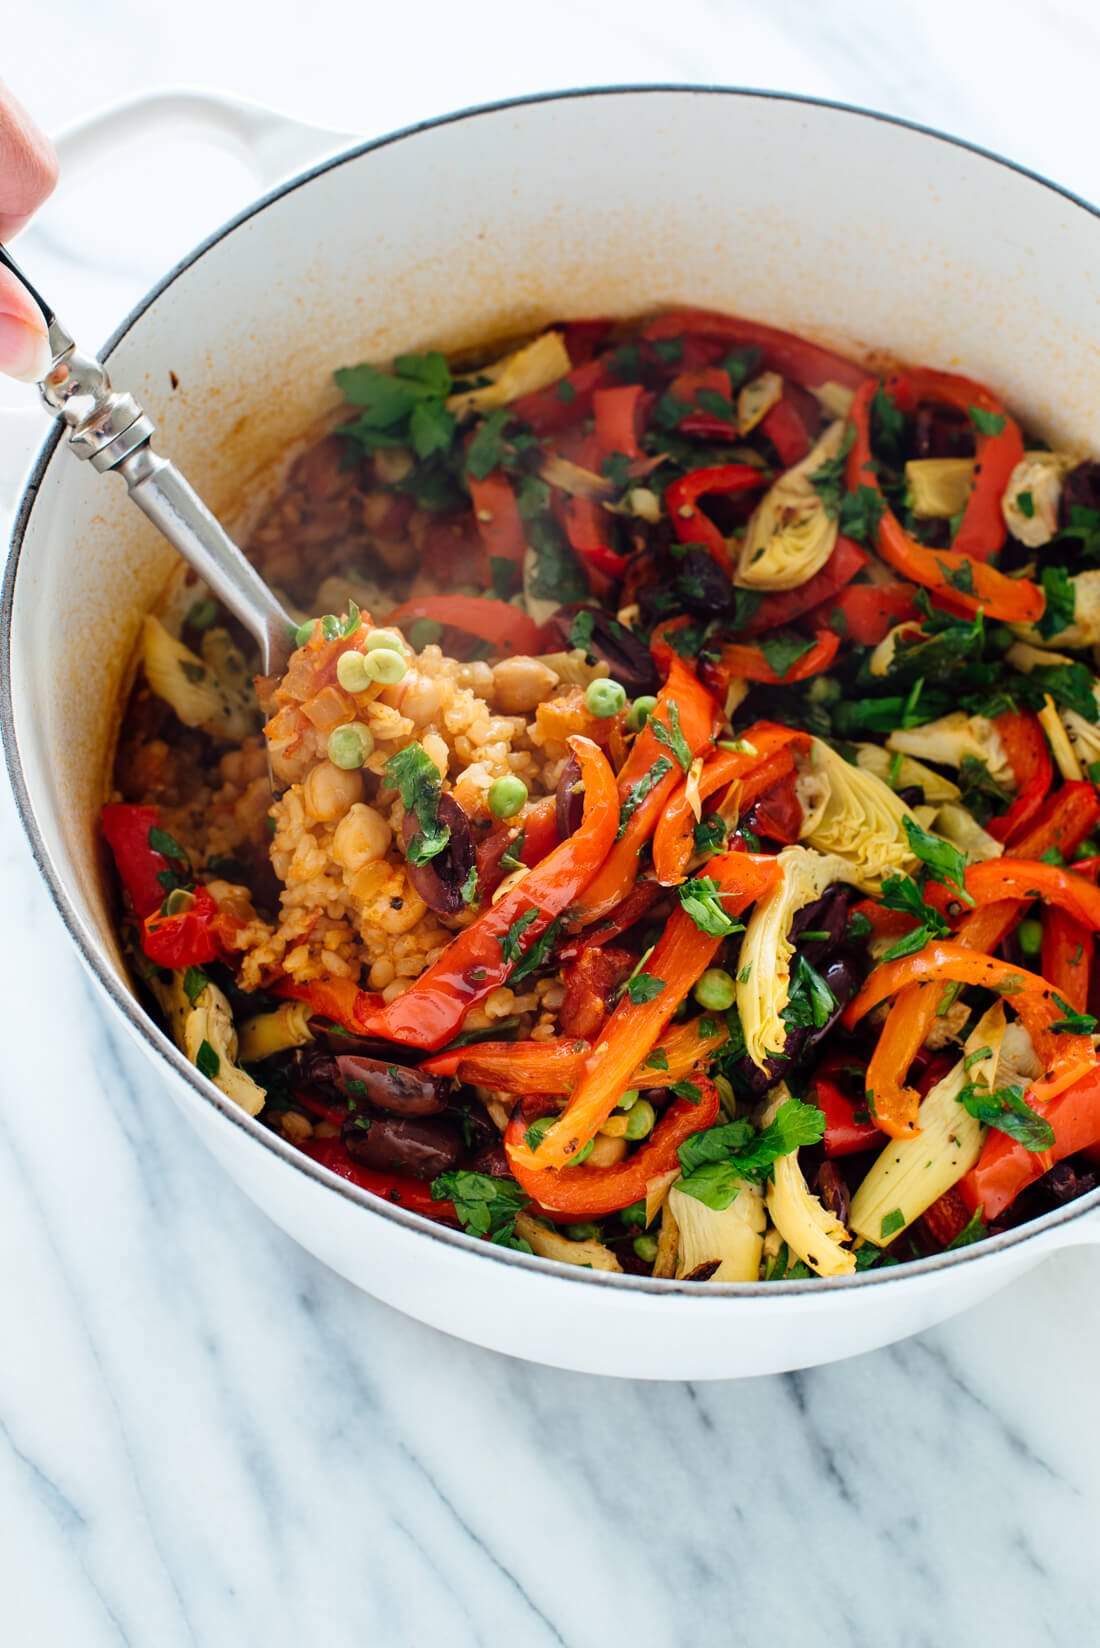 Serve up this hearty vegetable paella! It's a perfect meal for vegans, vegetarians and vegetable lovers.